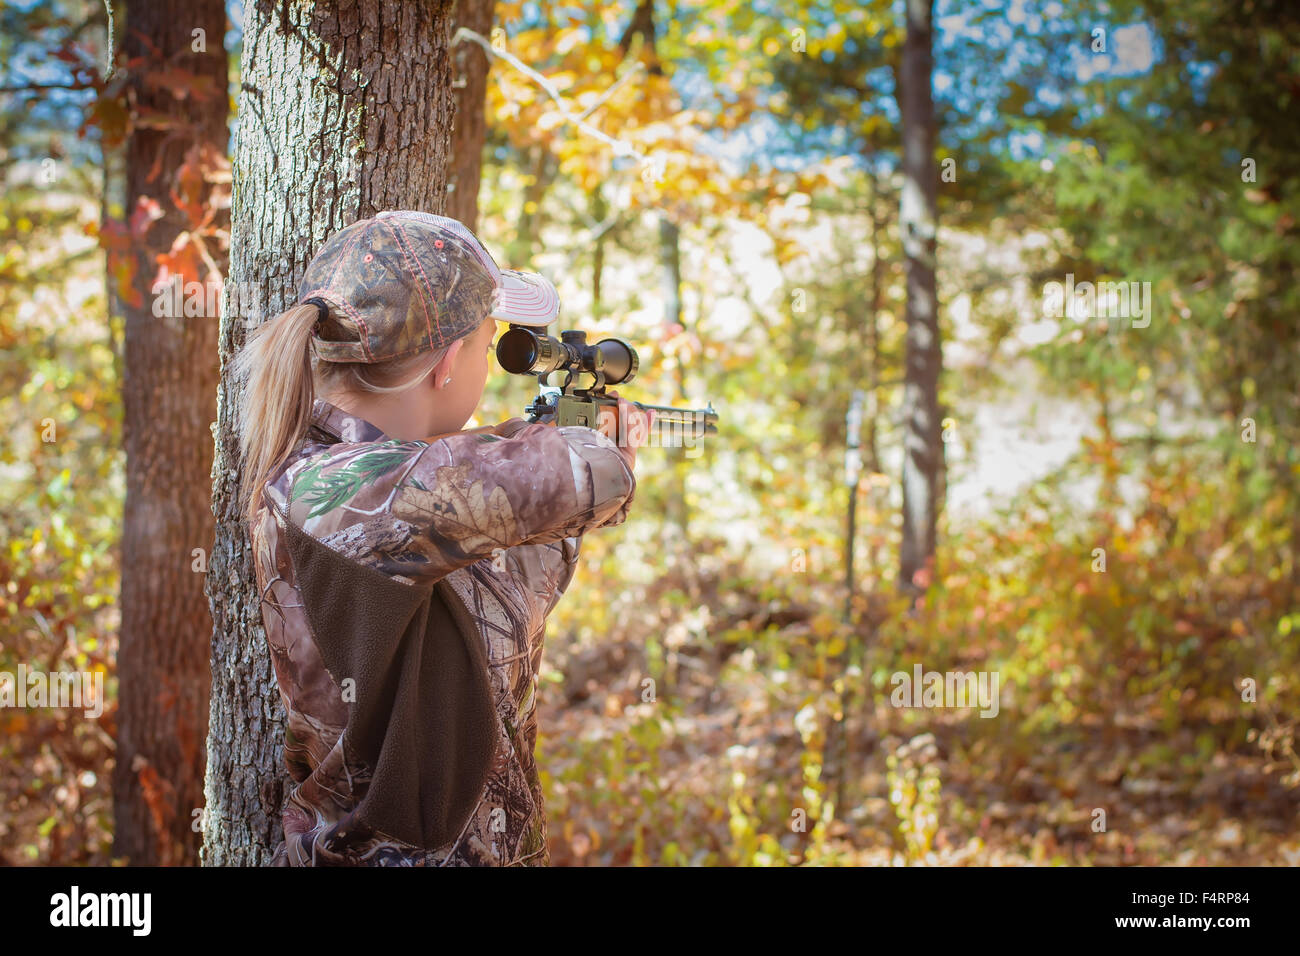 Young woman aiming a rifle in a wooded area wearing camouflage. Stock Photo